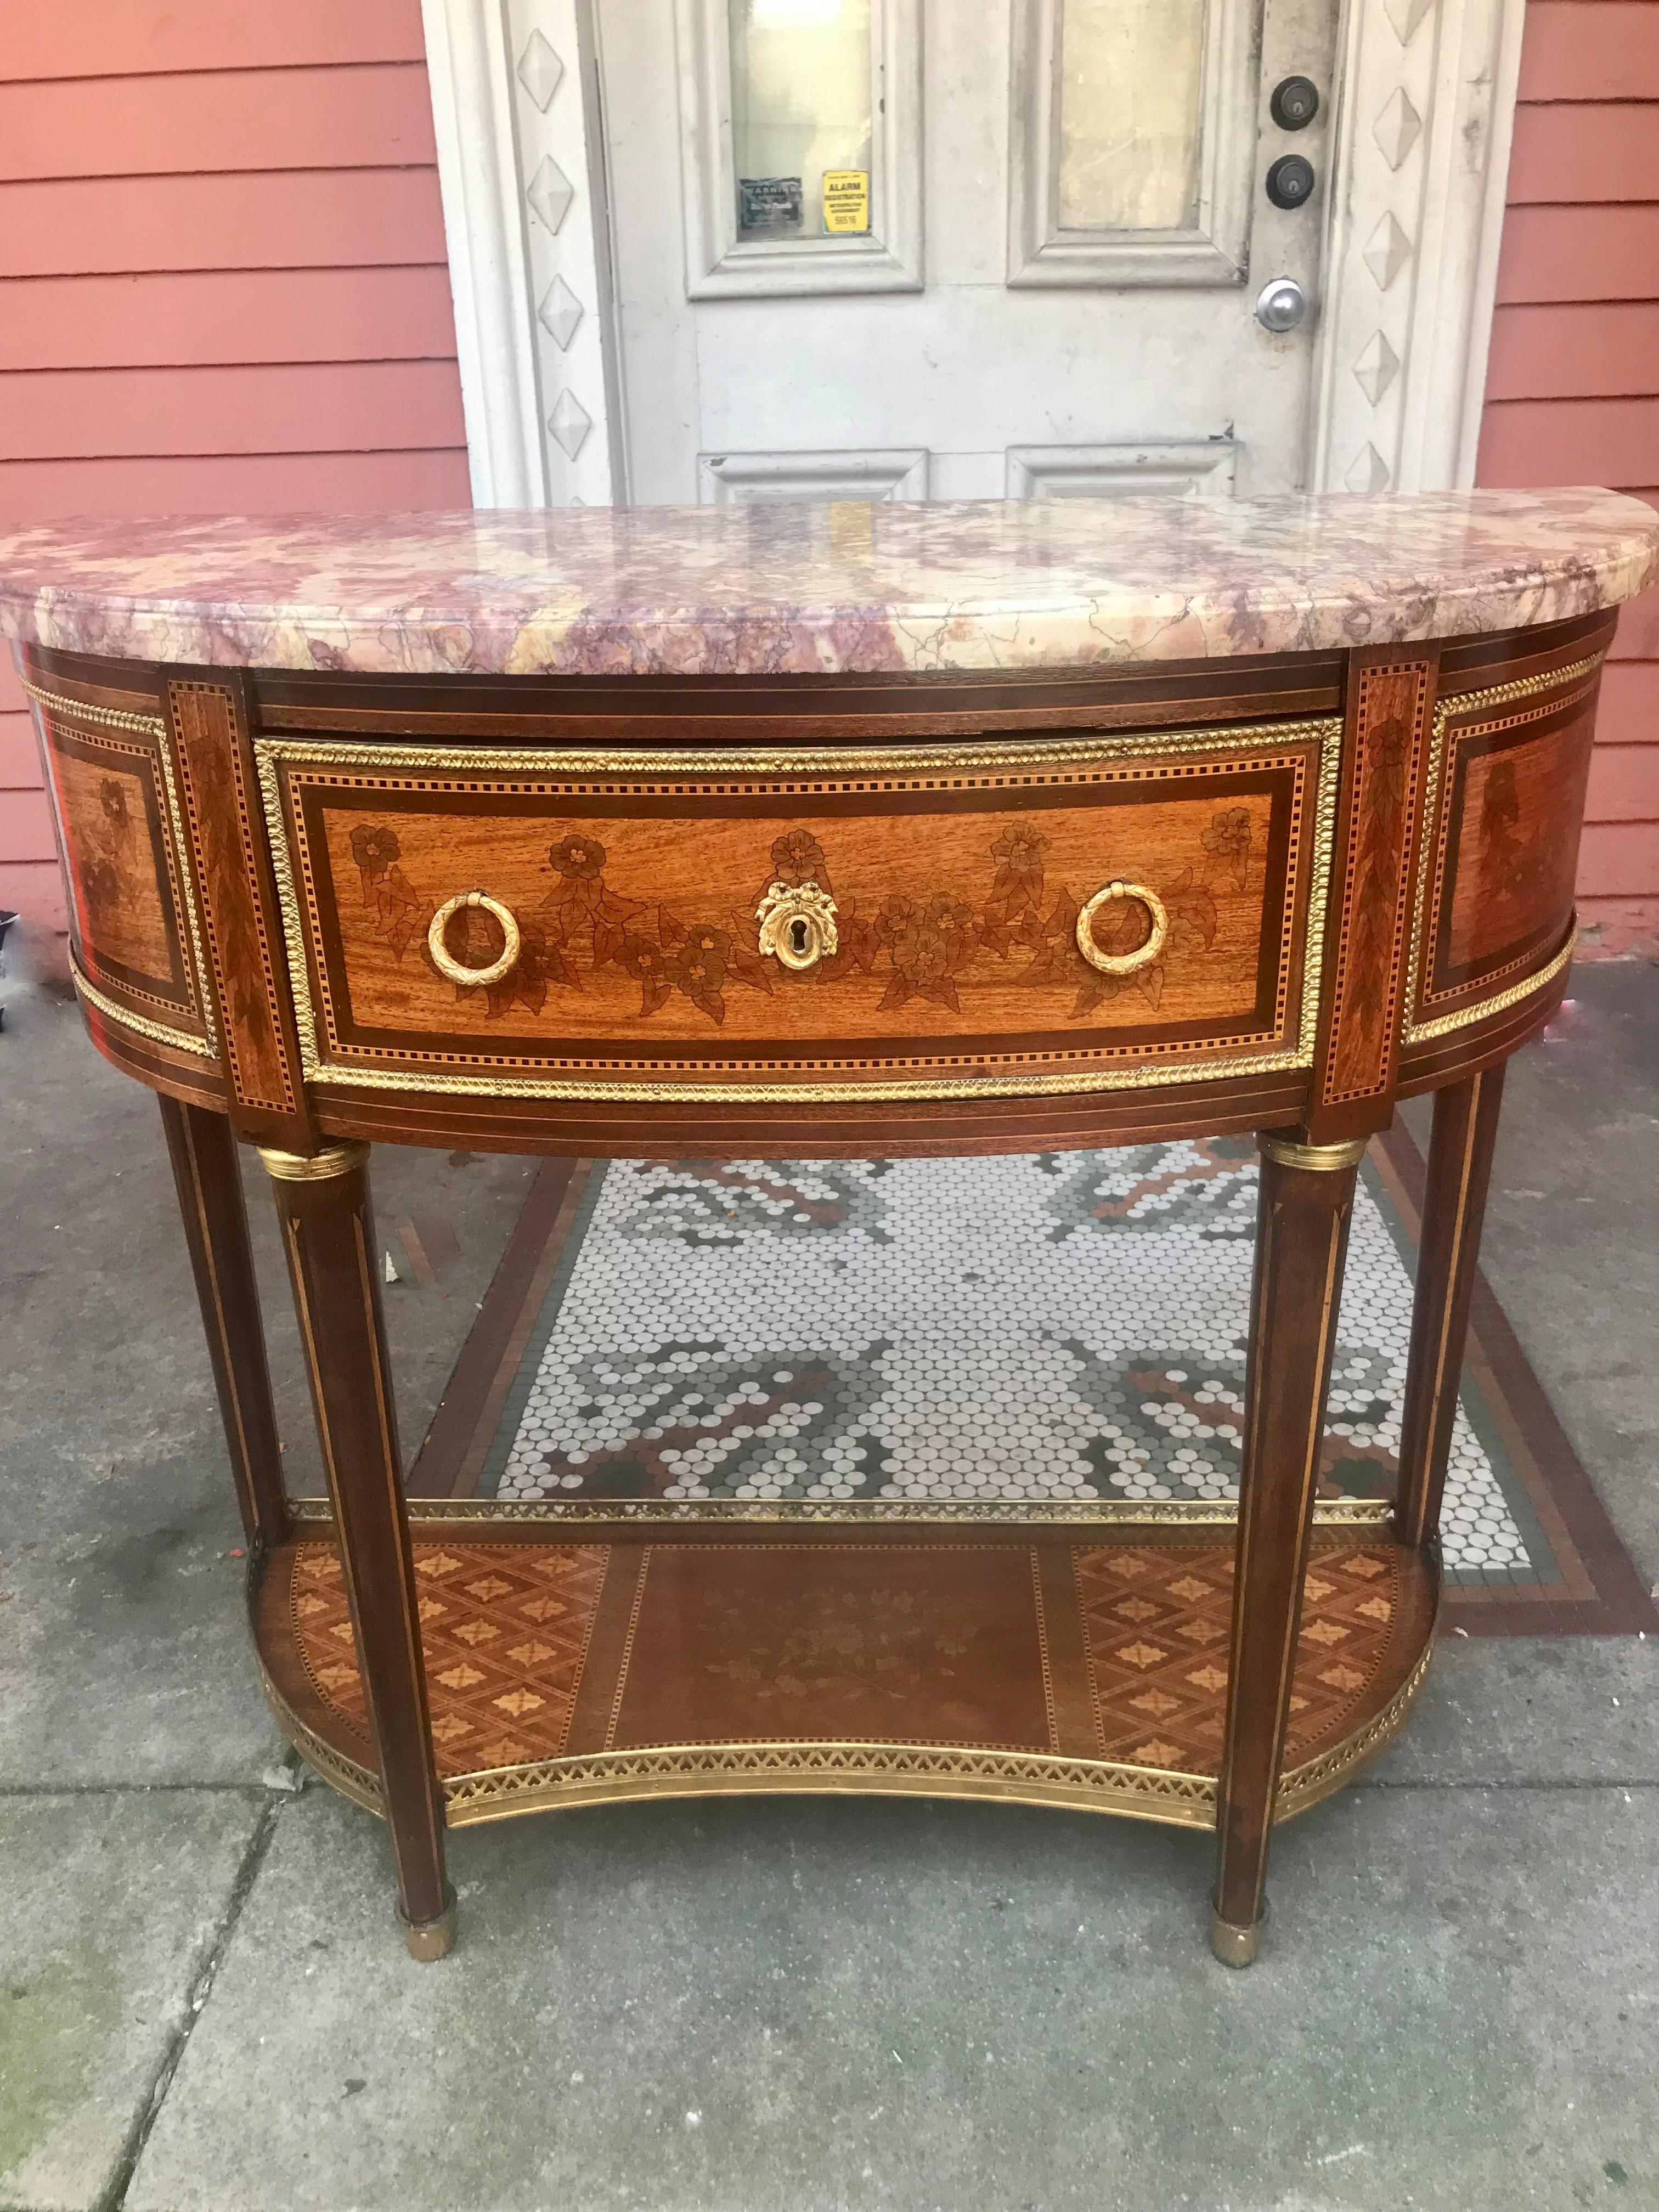 trimmed in gilt metal mounts . Very pretty and presents very well . The top skirt stenciled with floral garlands across three panels , the 4 leg stiles with downward festoons. The legs inlaid with spears. the bottom stretcher with central floral